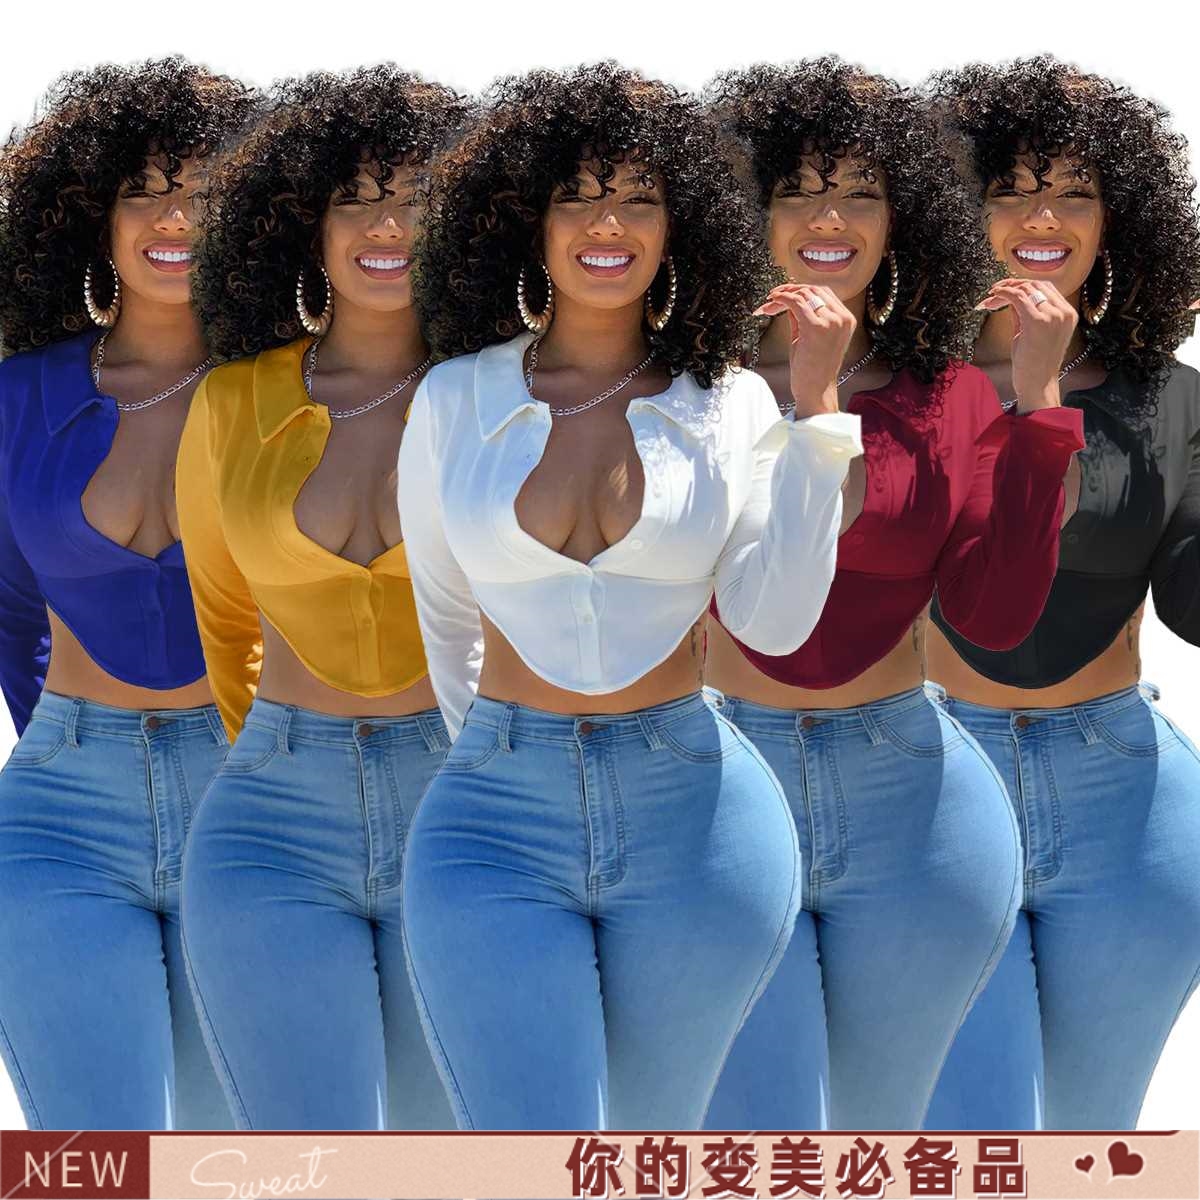 Hancs Comfortable breathable and sexy show feminine charm-封面